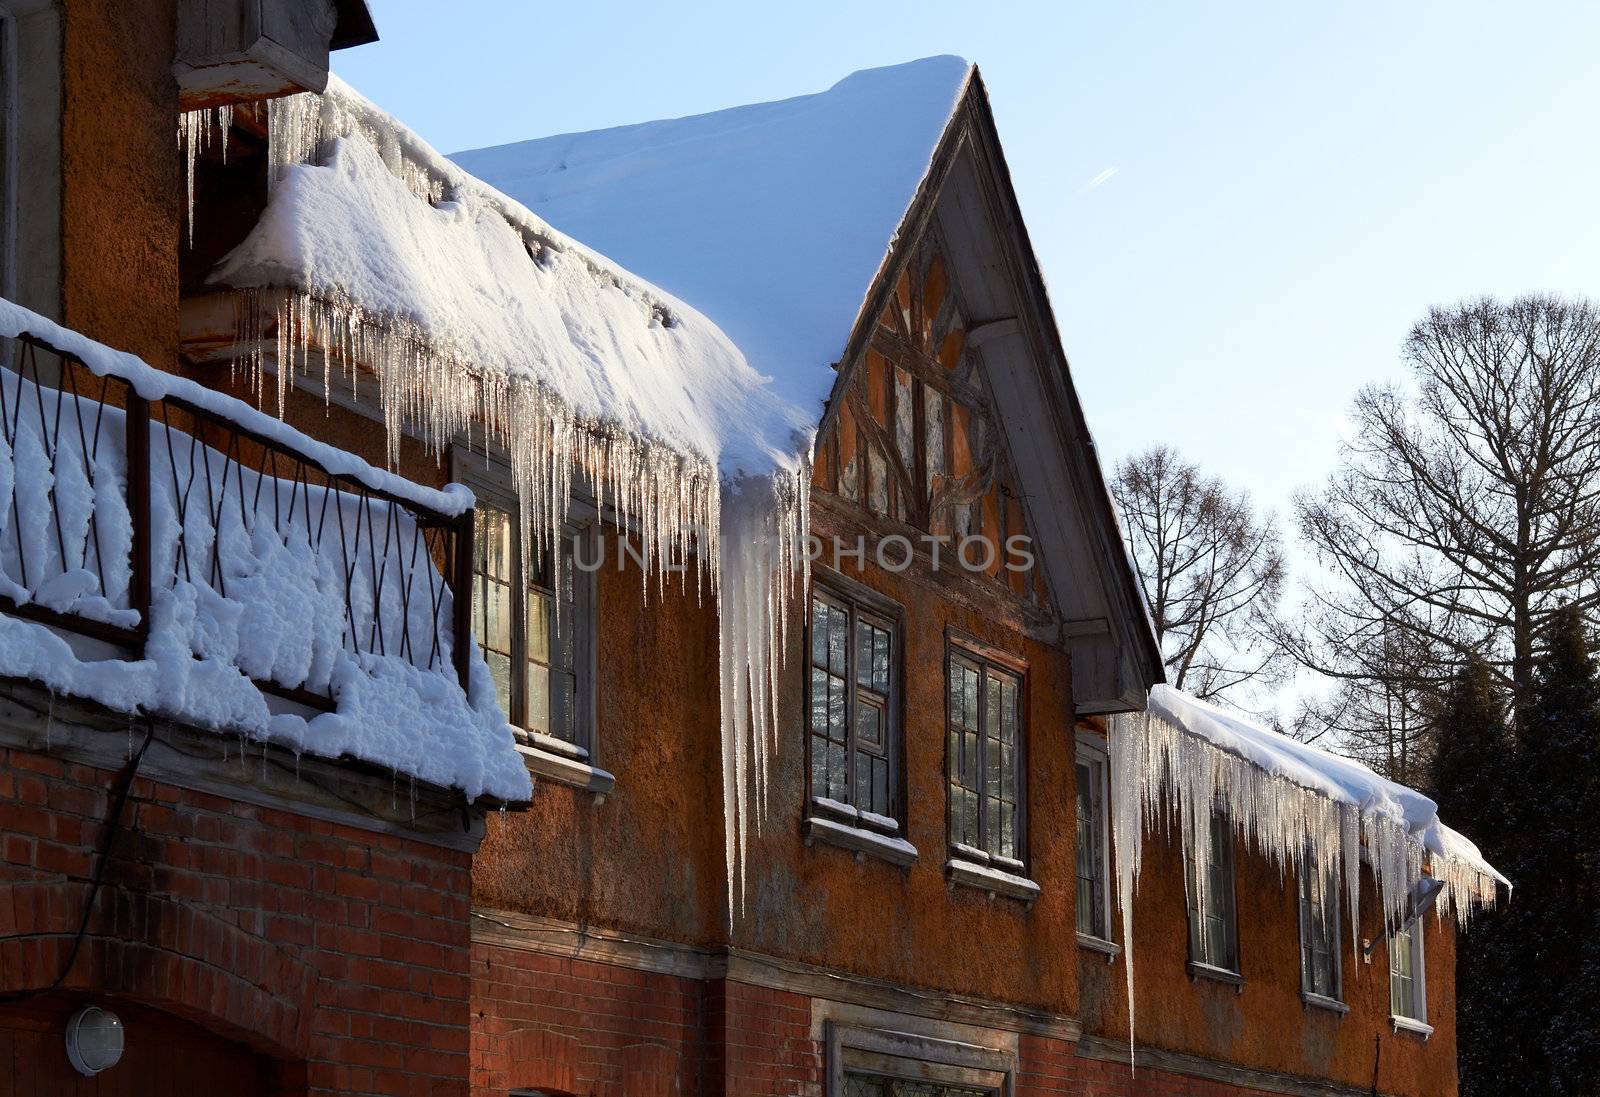 Windows Beneath Icicles, roof of rural winter house